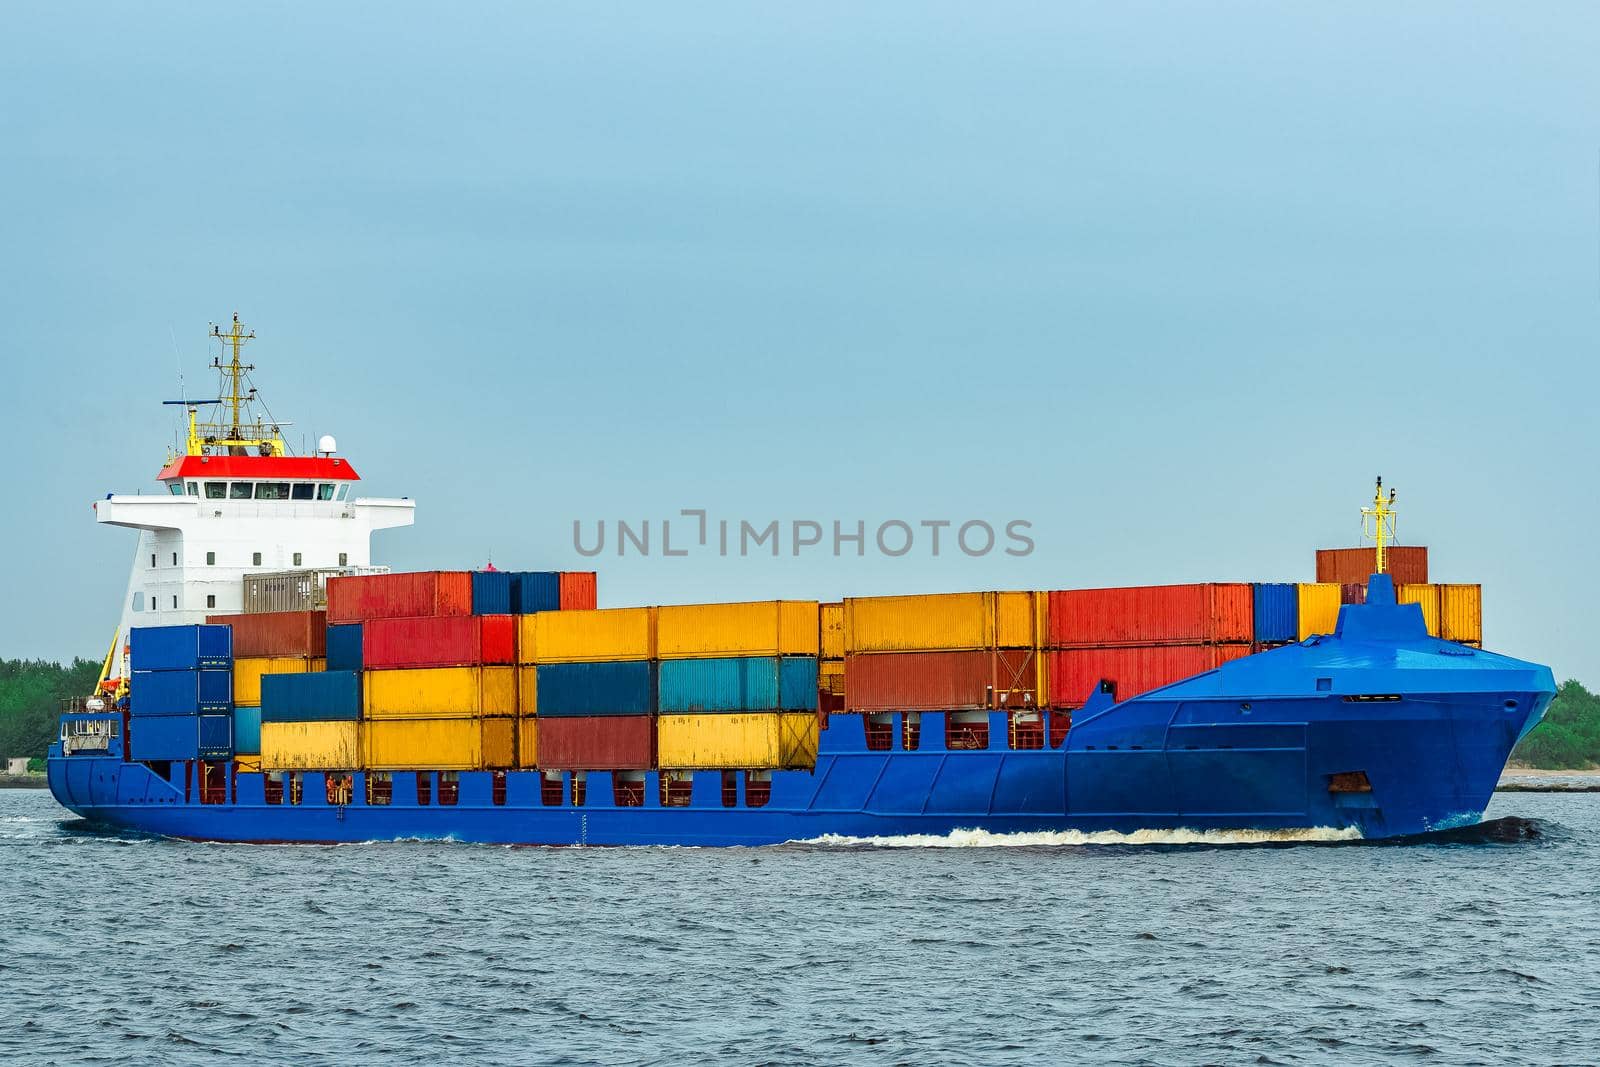 Blue cargo container ship fully loaded underway